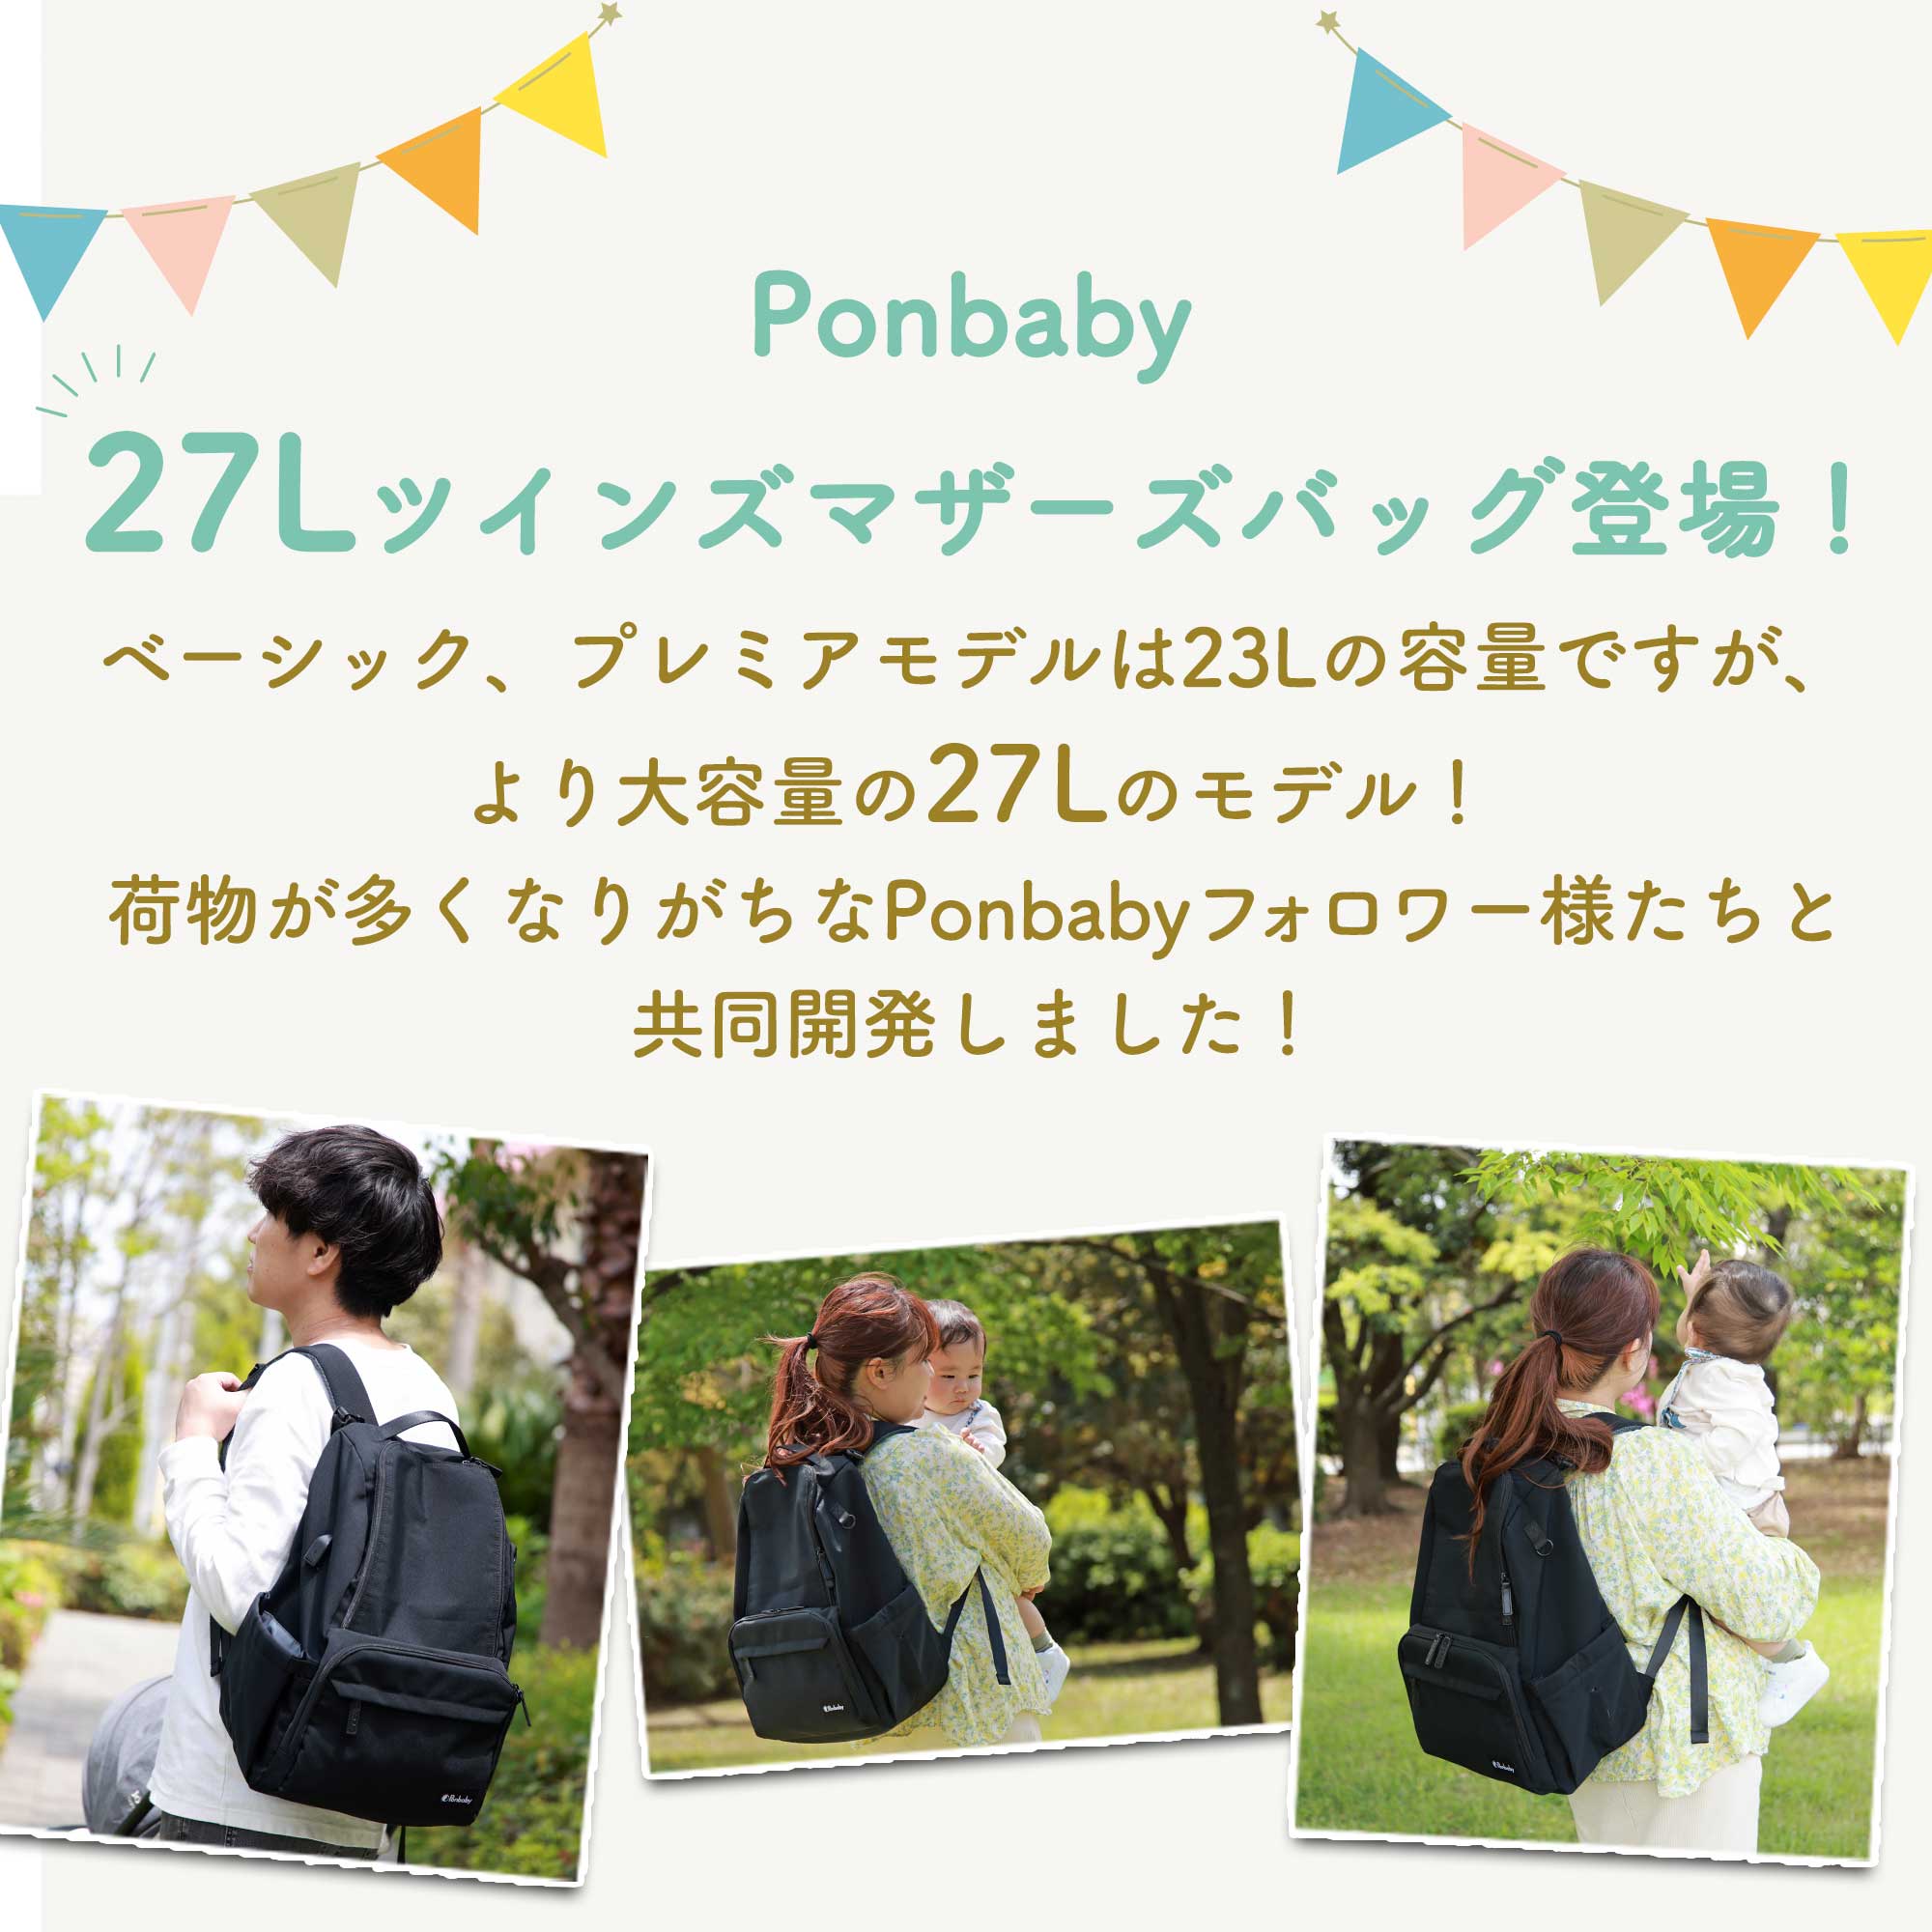  mother z rucksack mother's bag rucksack bag ponbabypon baby celebration of a birth high capacity light weight Twins 27L waterproof processing celebration of a birth gift pregnancy Ponbaby